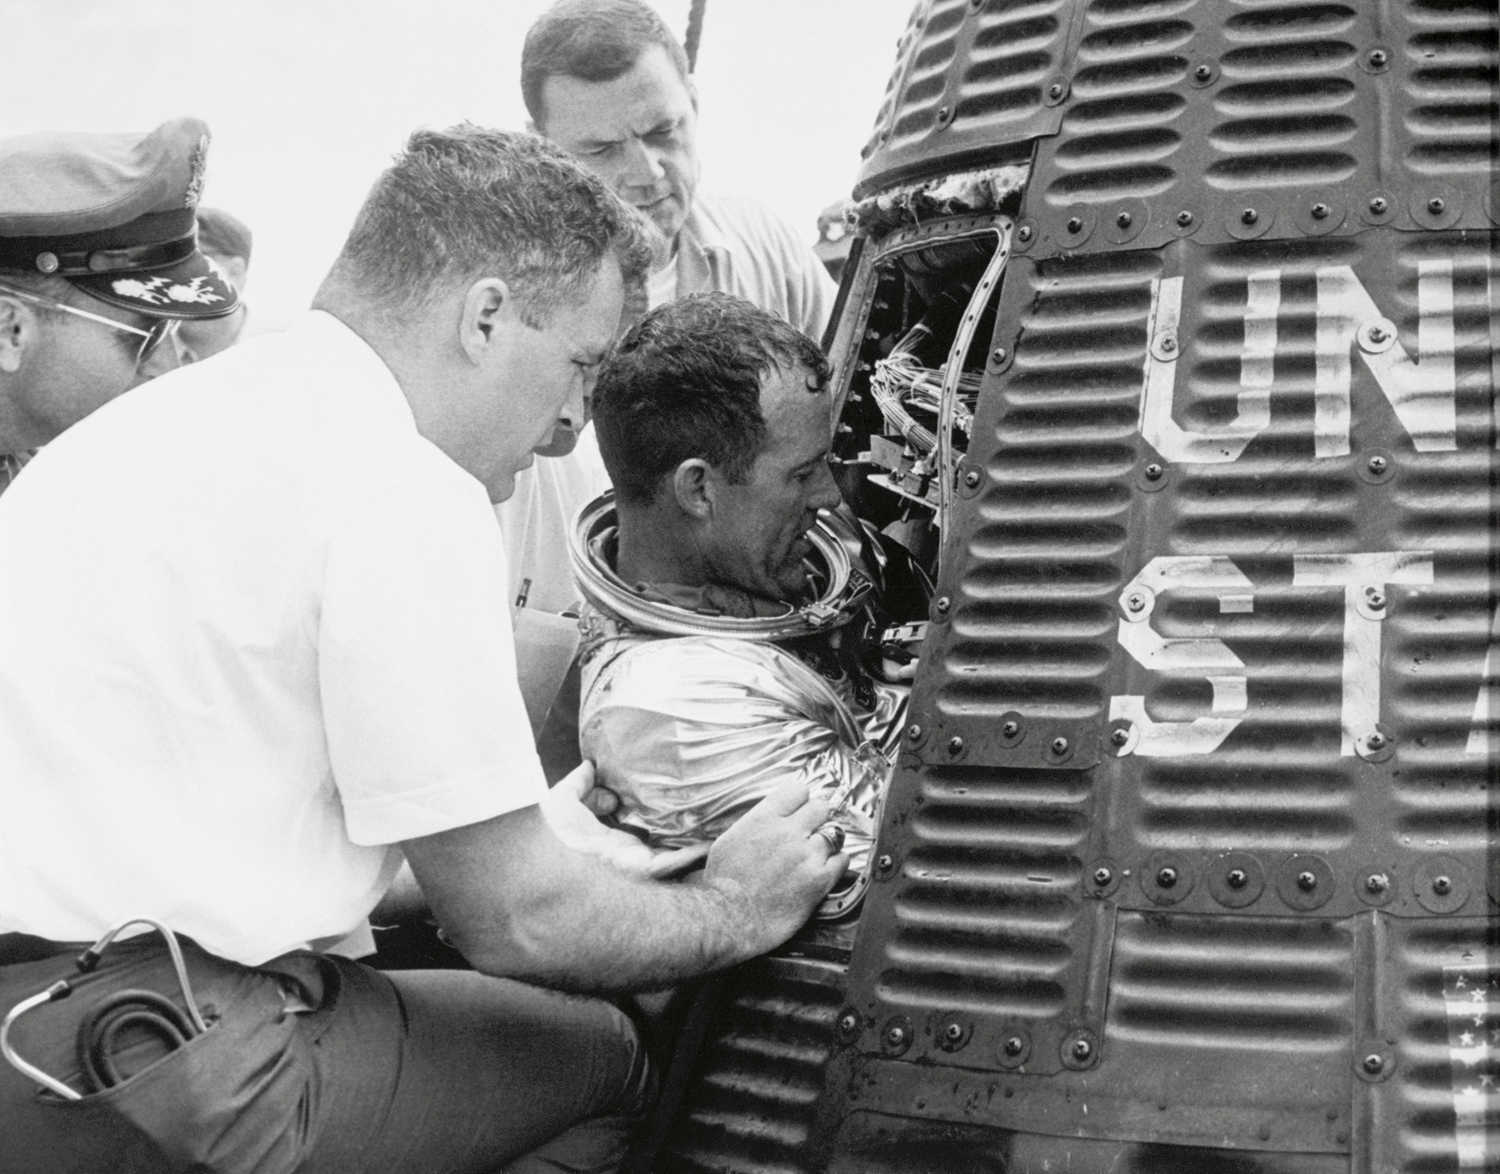 Gordon Cooper is extracted from the Faith 7 capsule, on the deck of the USS Kearsarge on 16 May 1963. The astronaut's 34-hour, 22-orbit mission proved as colorful as Cooper himself. Photo Credit: NASA